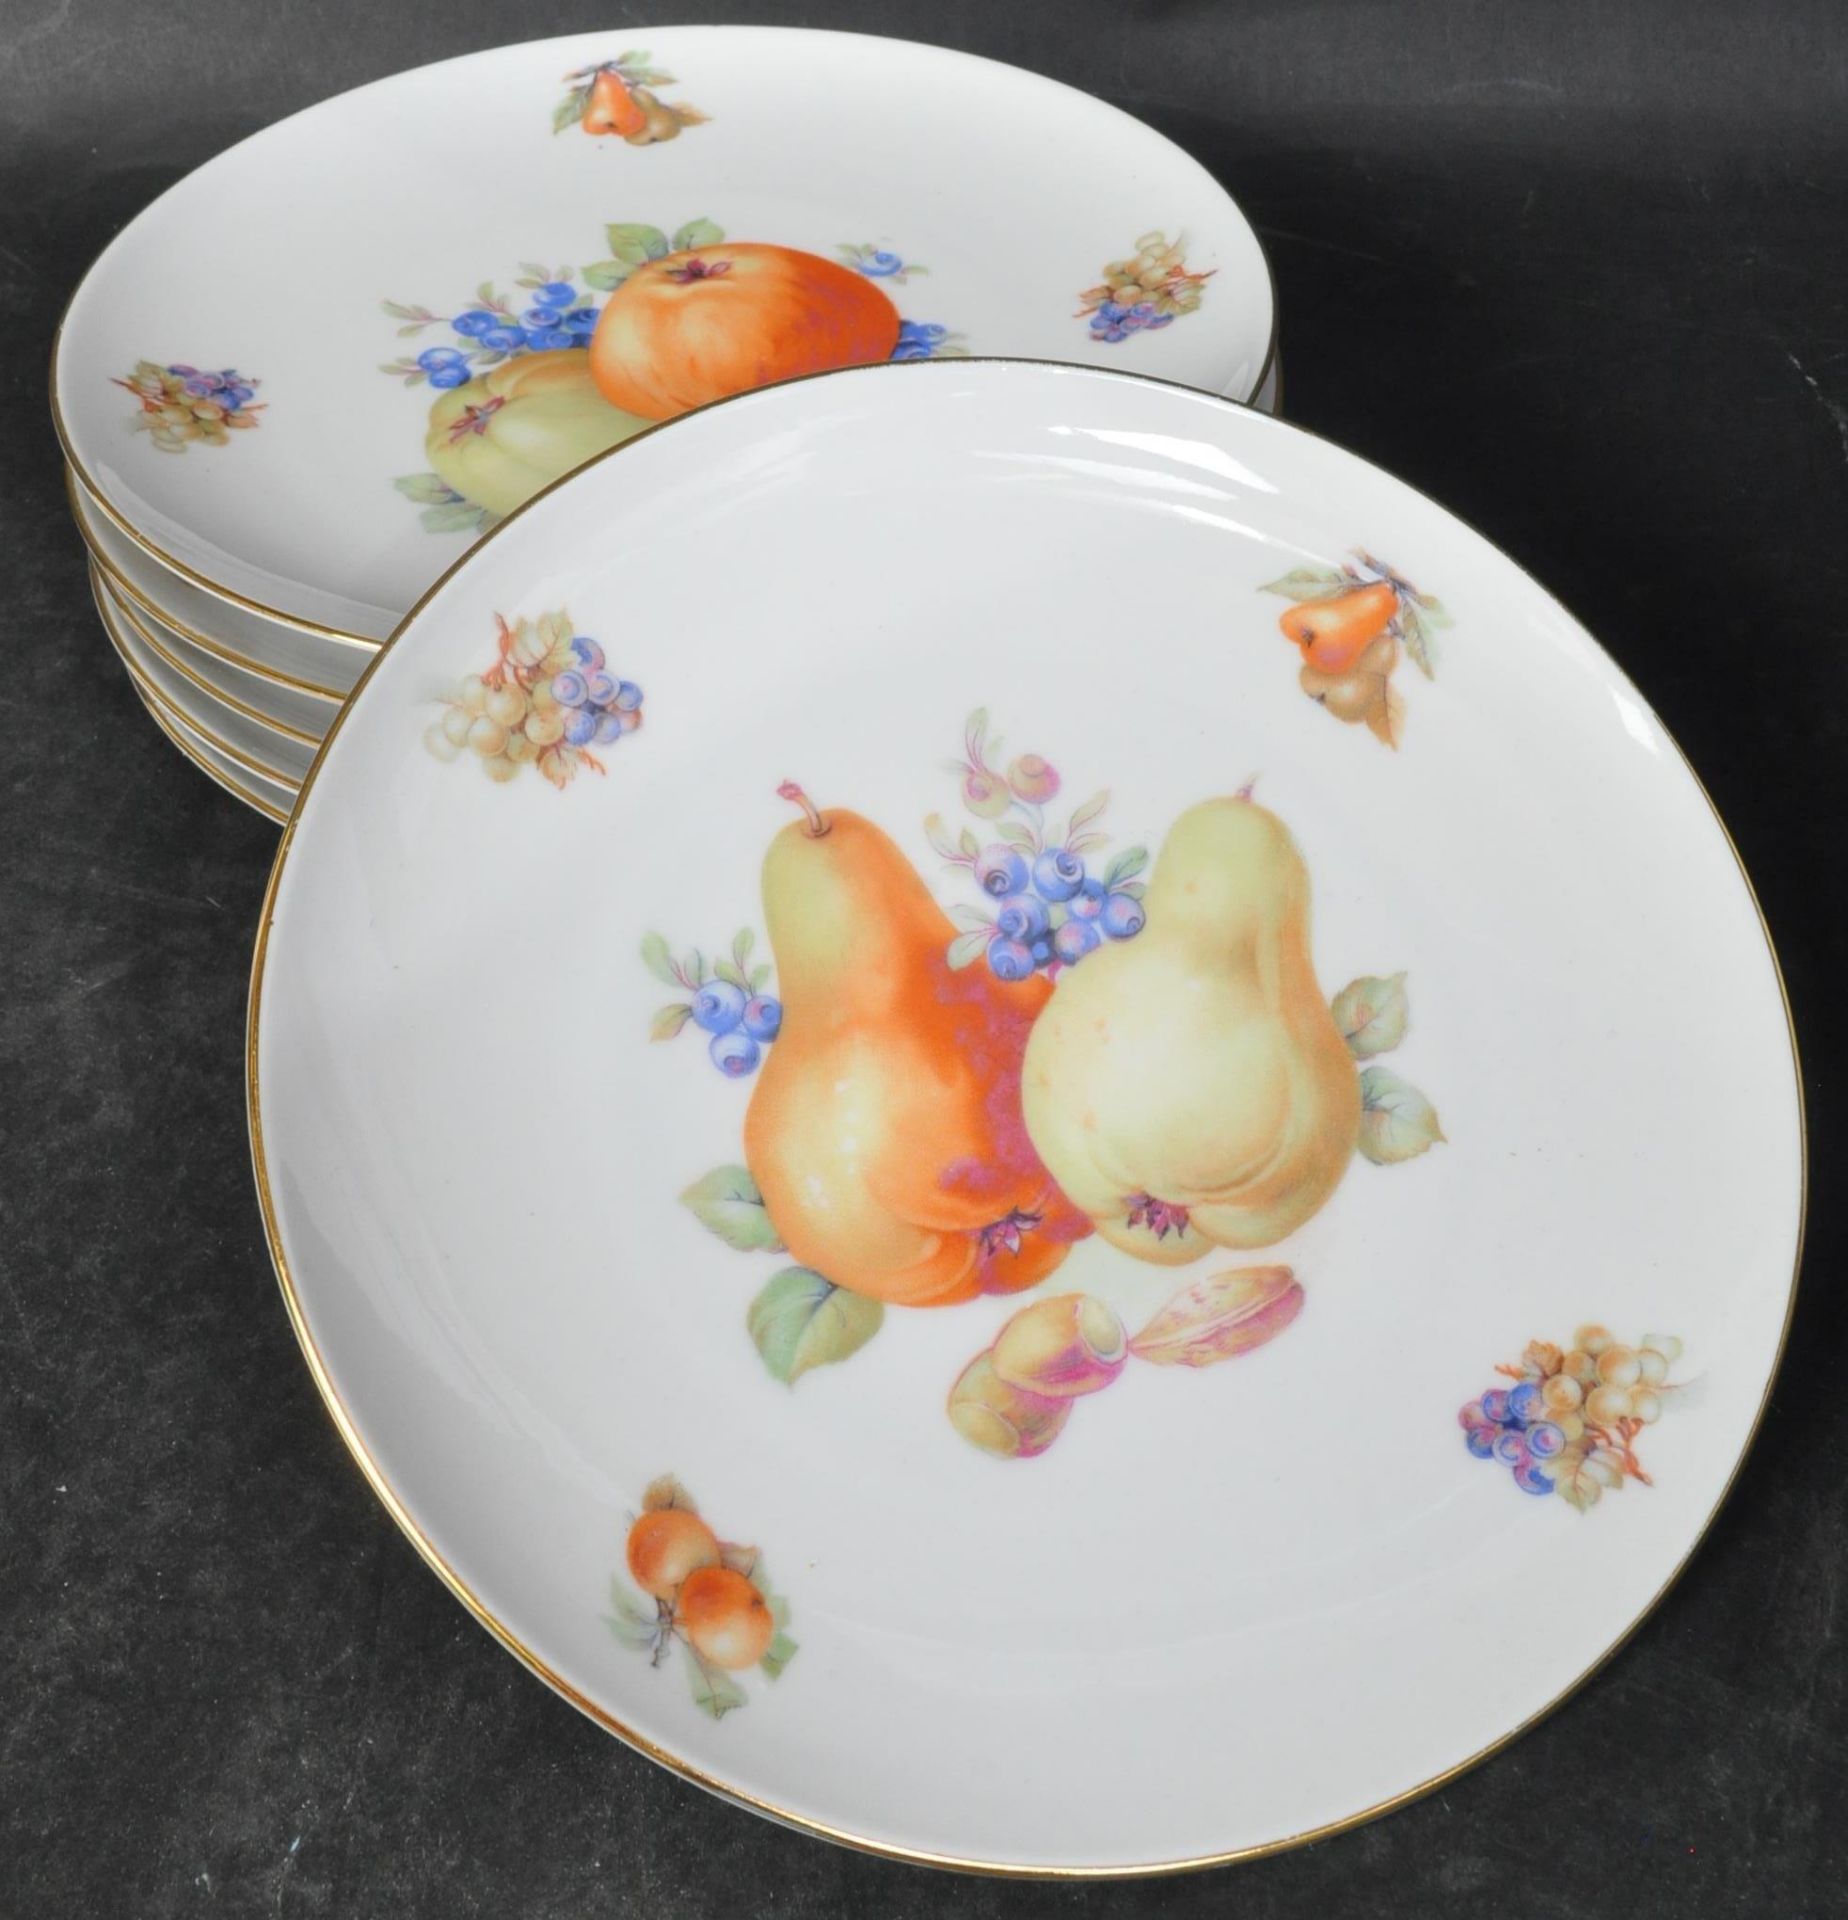 COLLECTION OF VINTAGE BAVARIAN SCHUMANN CHINA PLATES - Image 4 of 5